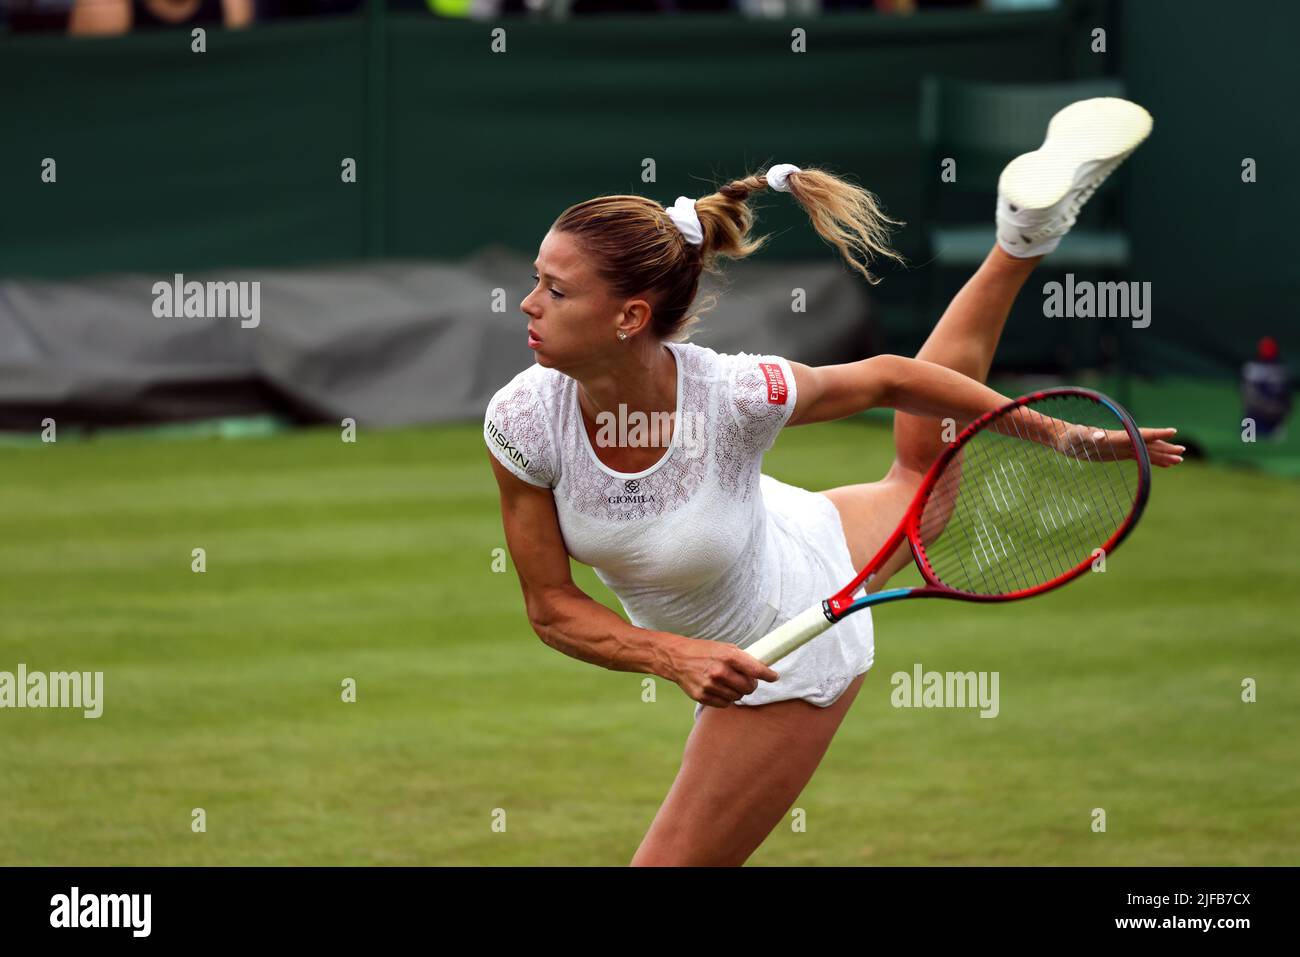 Italy's Camila Giorgi serving to Magdalena Fech of Poland during their first round match on Tuesday, June 28 at Wimbledon. Giorgi lost the match in straight sets. Credit: Adam Stoltman/Alamy Live News Stock Photo